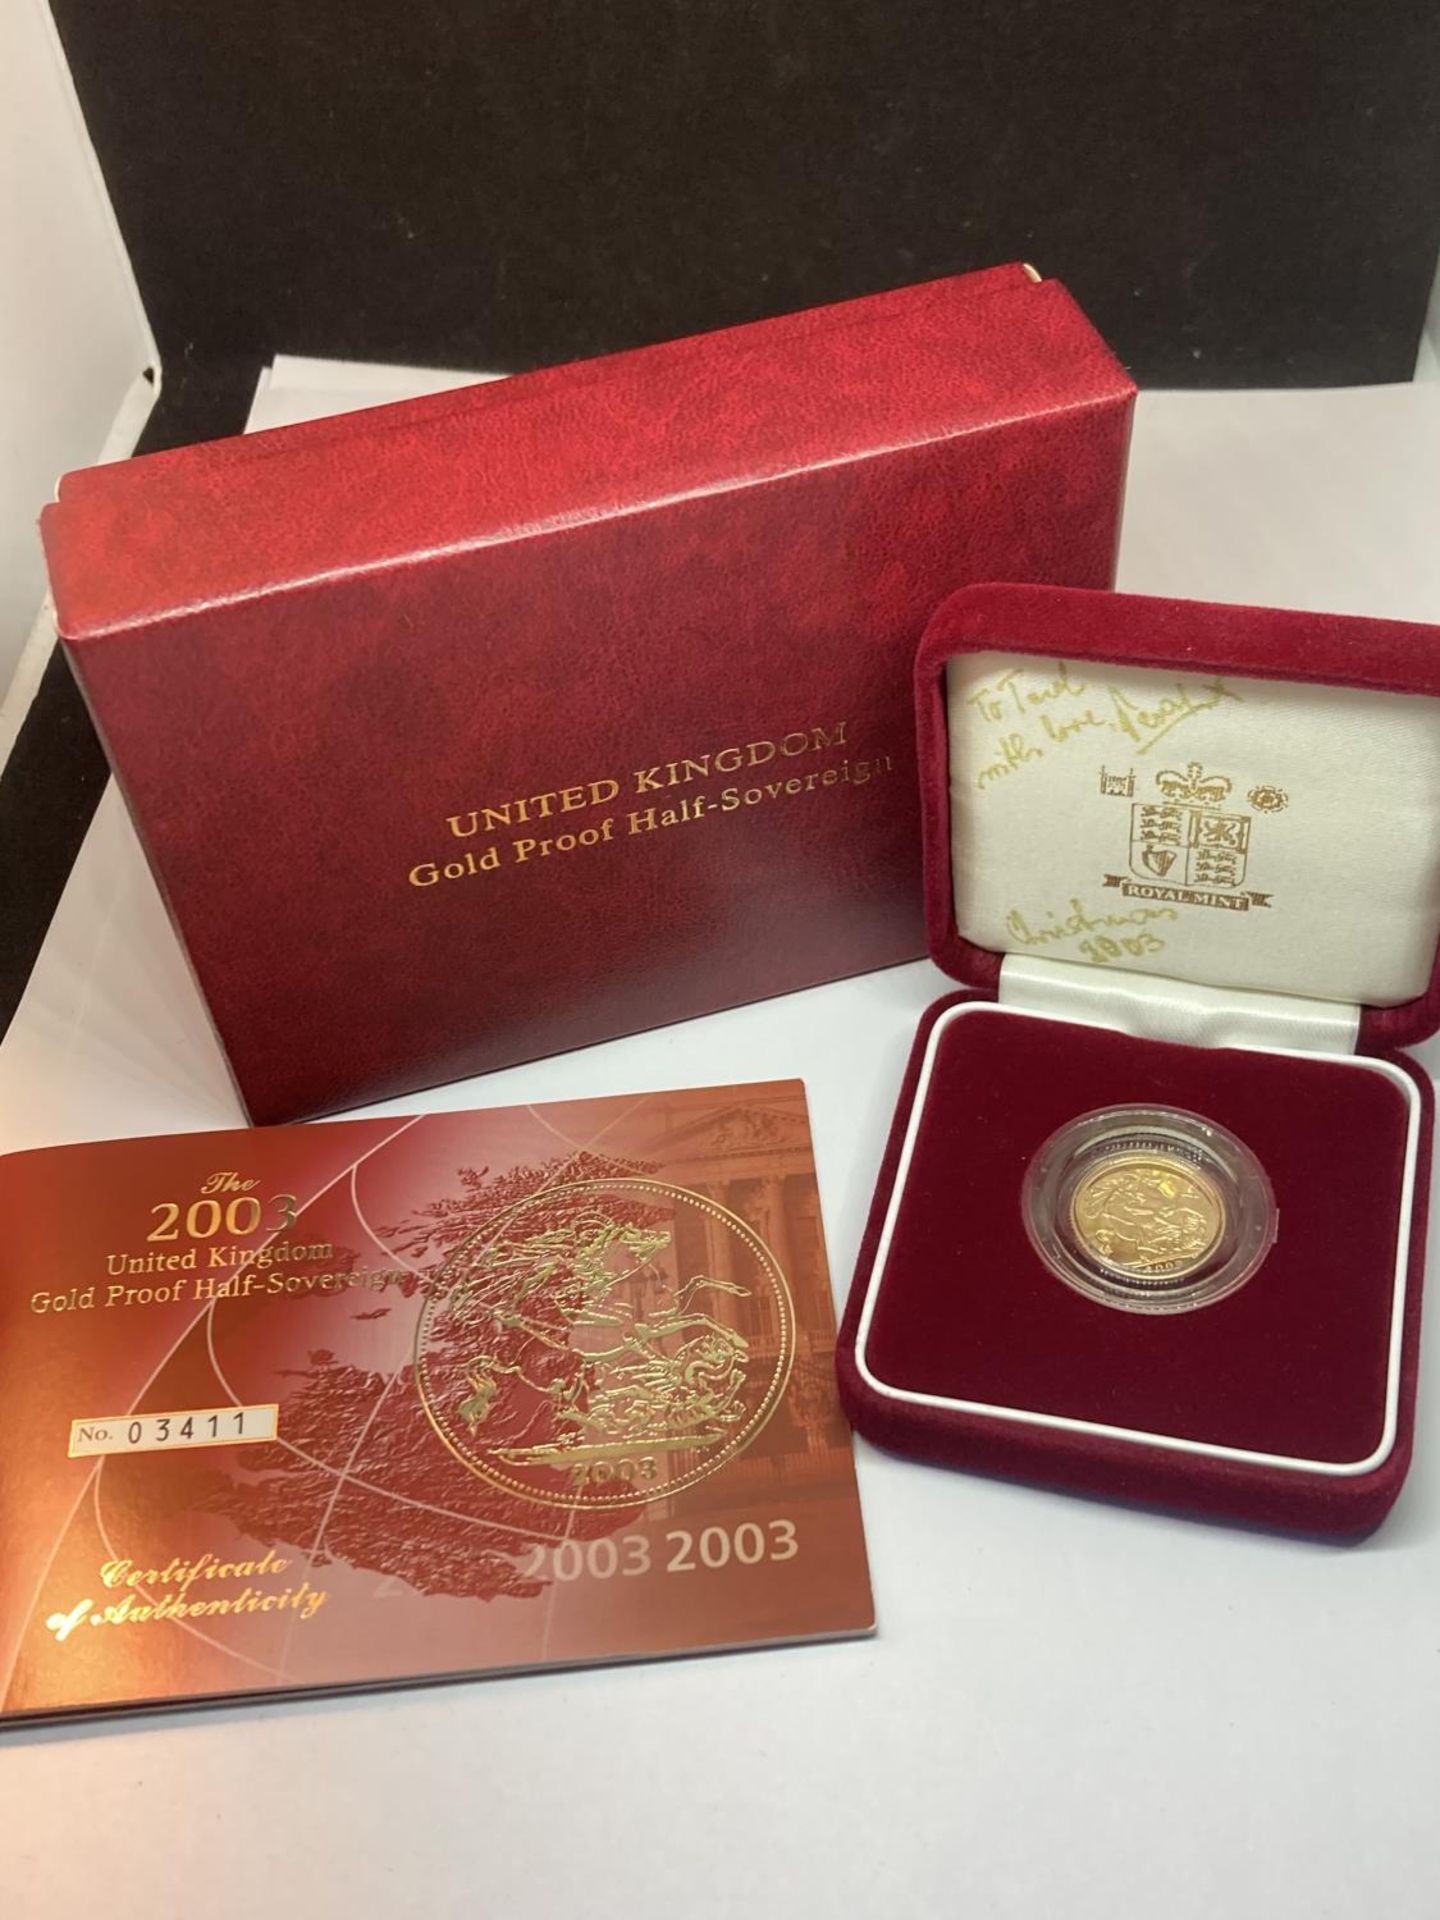 A 2003 GOLD PROOF HALF SOVEREIGN NO 03411 OF 10,000 IN A PRESENTATION BOX WITH CERTIFICATE OF